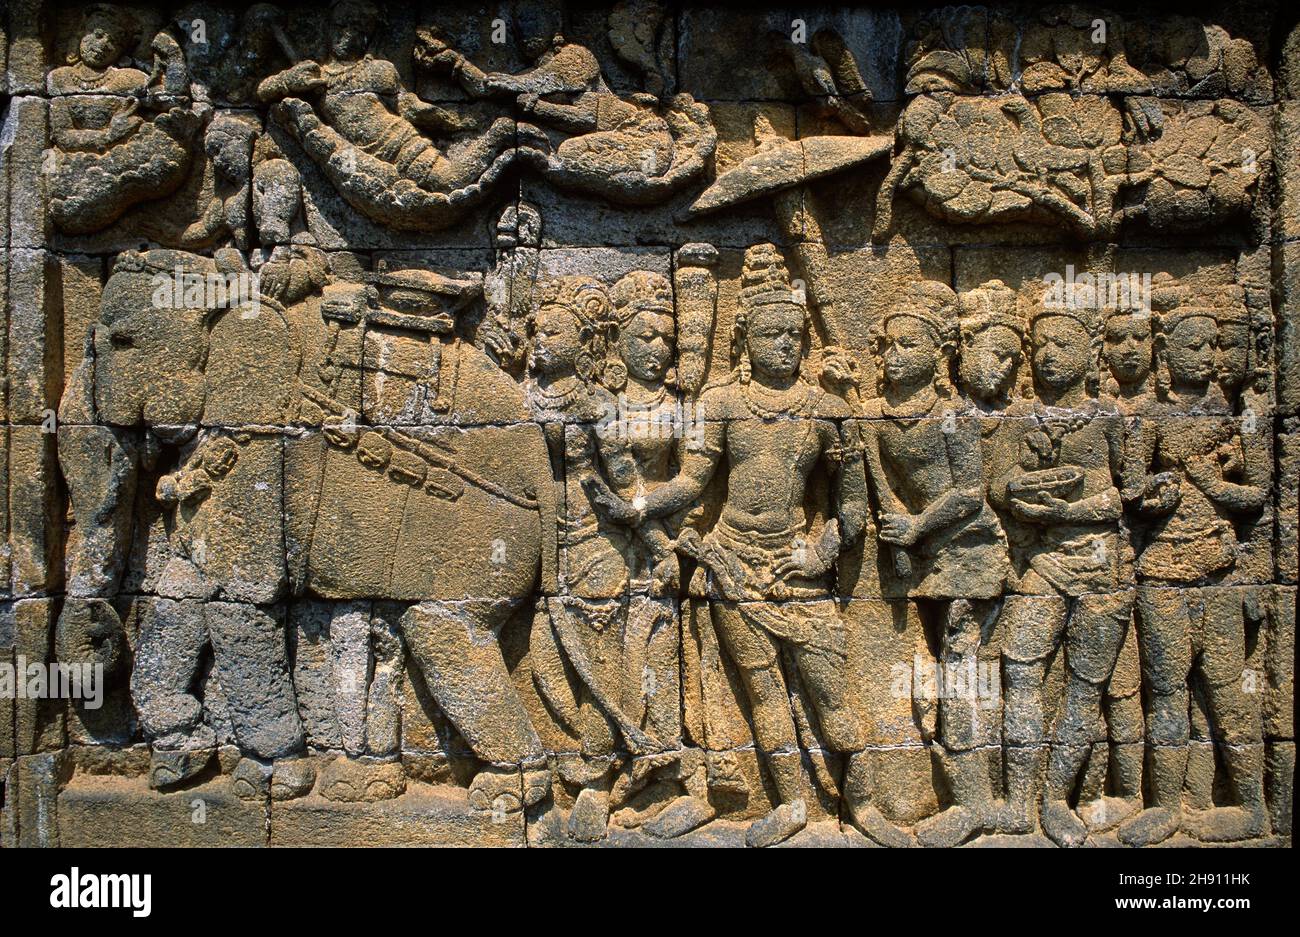 Borobudur or Barabudur is a Mahayana Buddhist temple from 7th century. Carved relief stone. Magelang, Java, Indonesia. Stock Photo